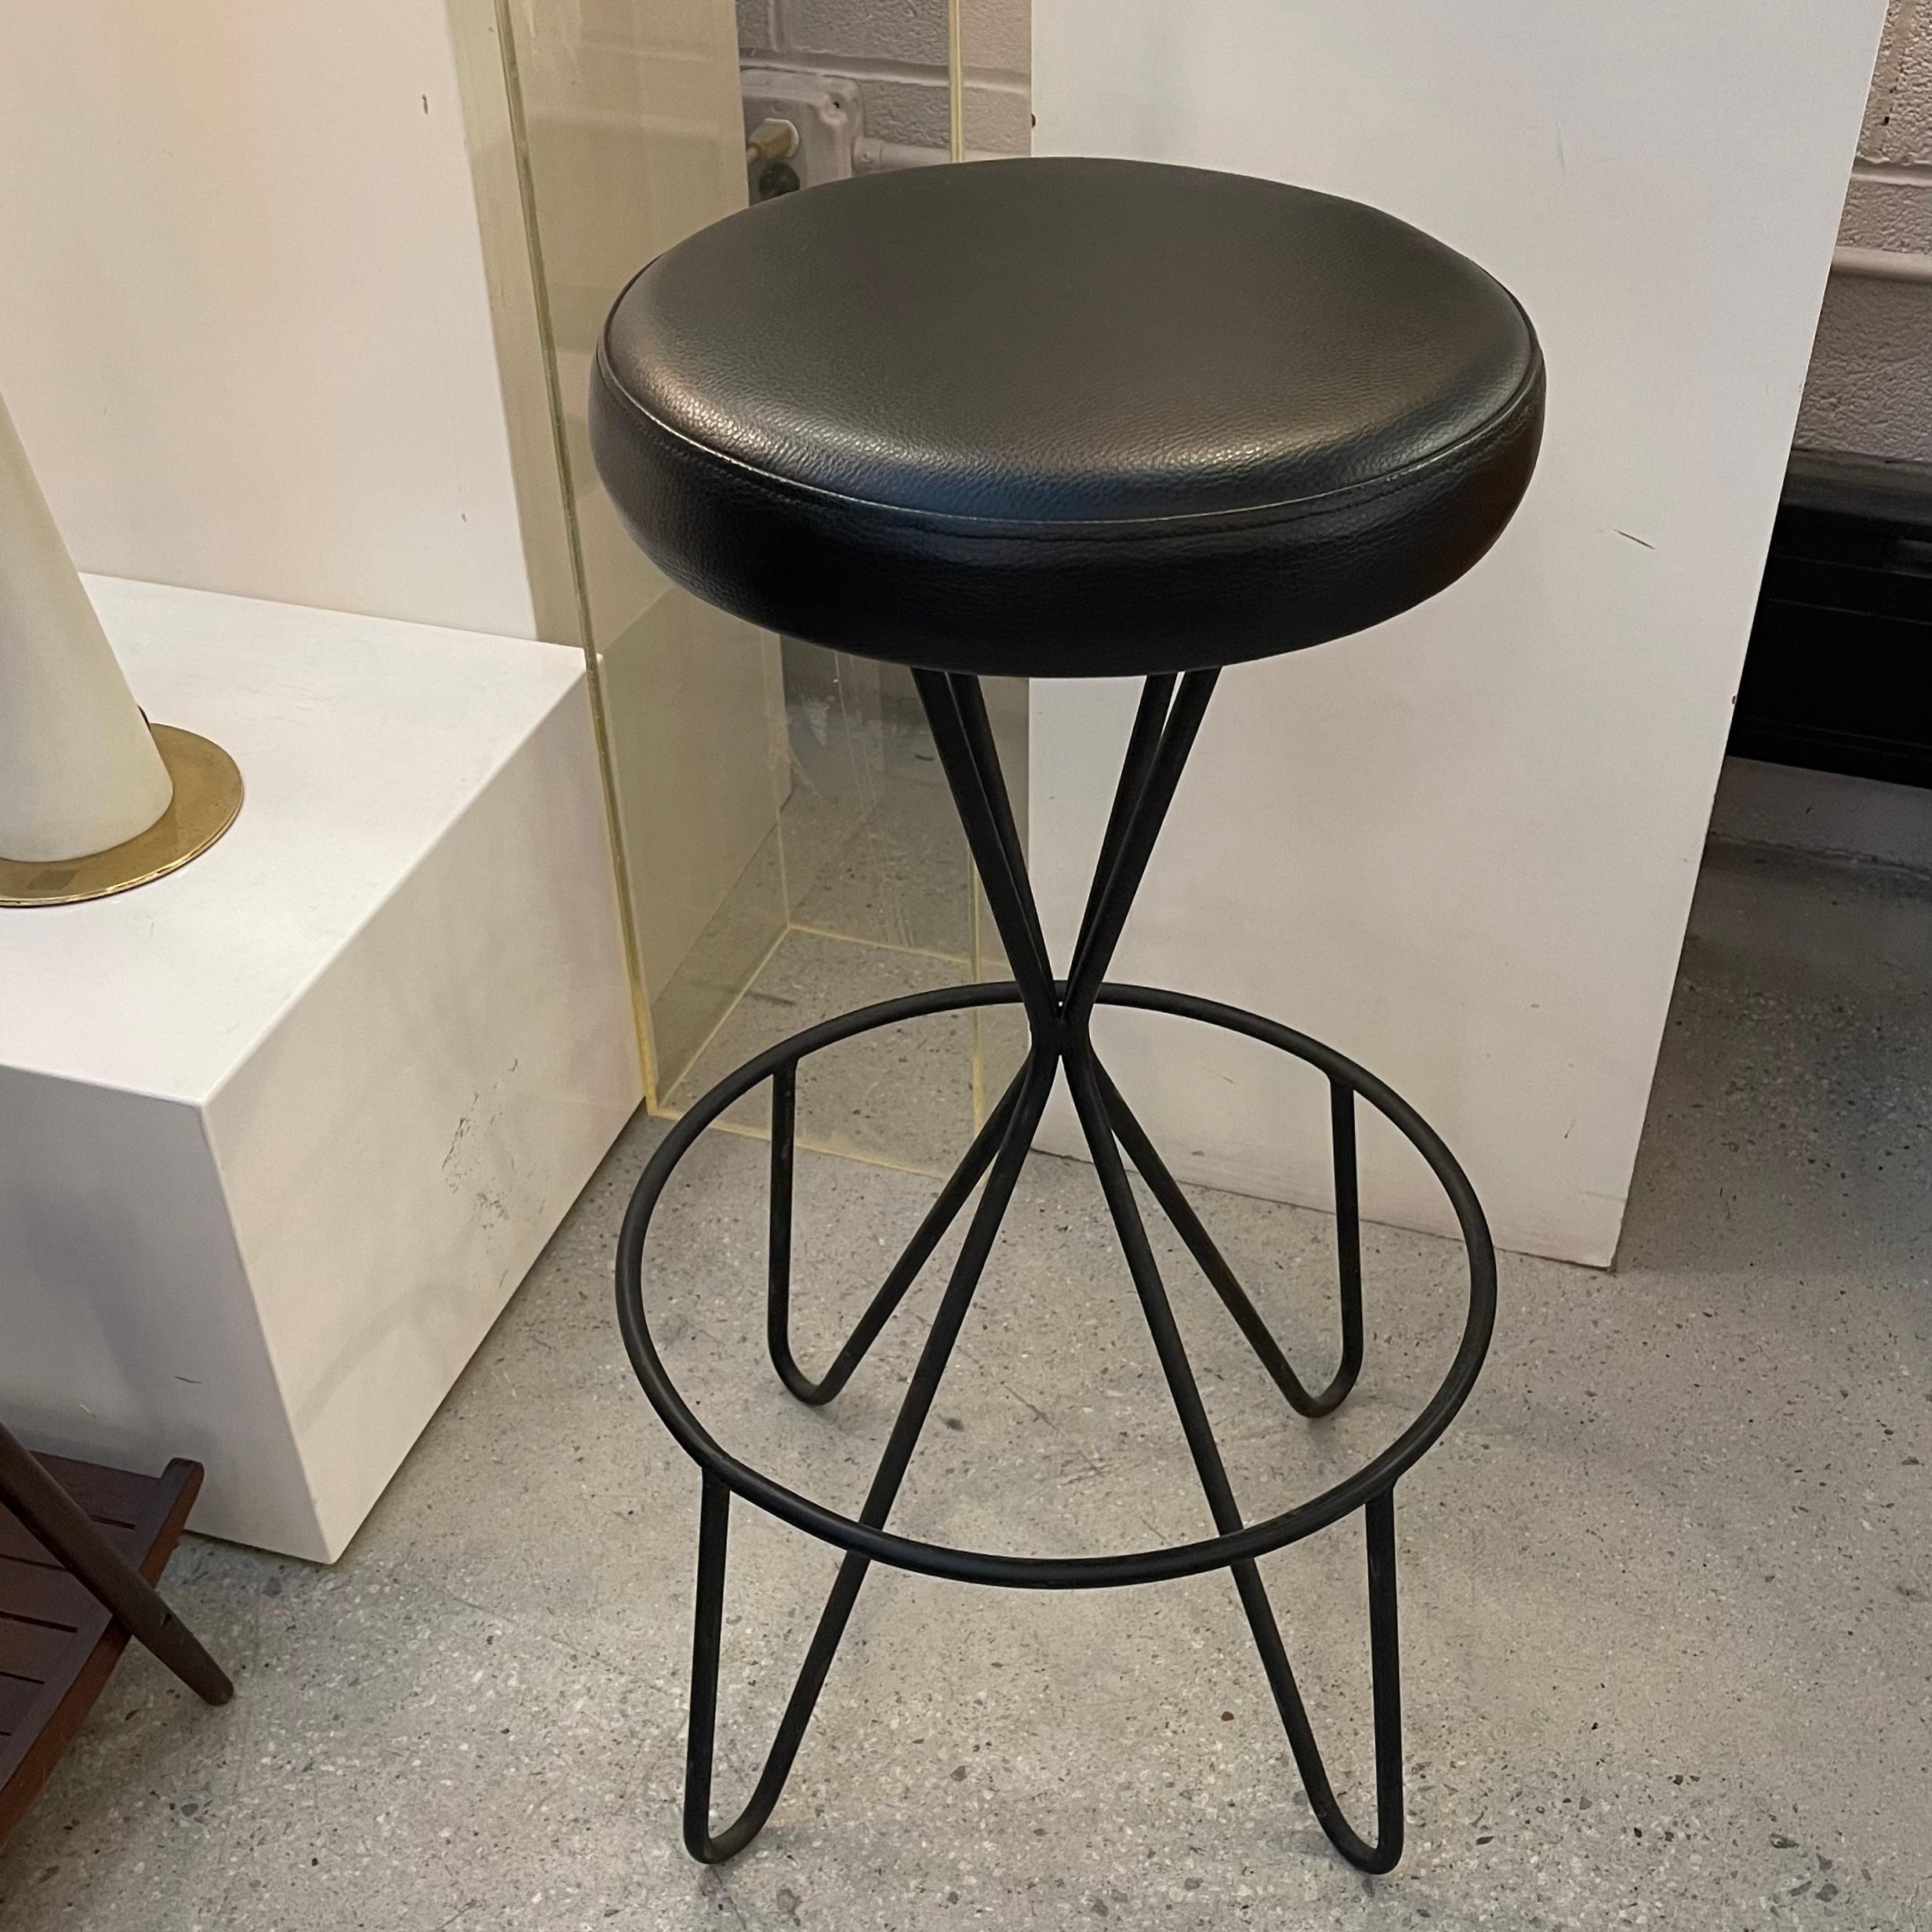 Mid-Century Modern, swivel bar stool by Frederick Weinberg with wrought iron base and re-upholstered black vinyl seat. The footrest is 17 inch diameter and the seat measures 14 inch diameter.